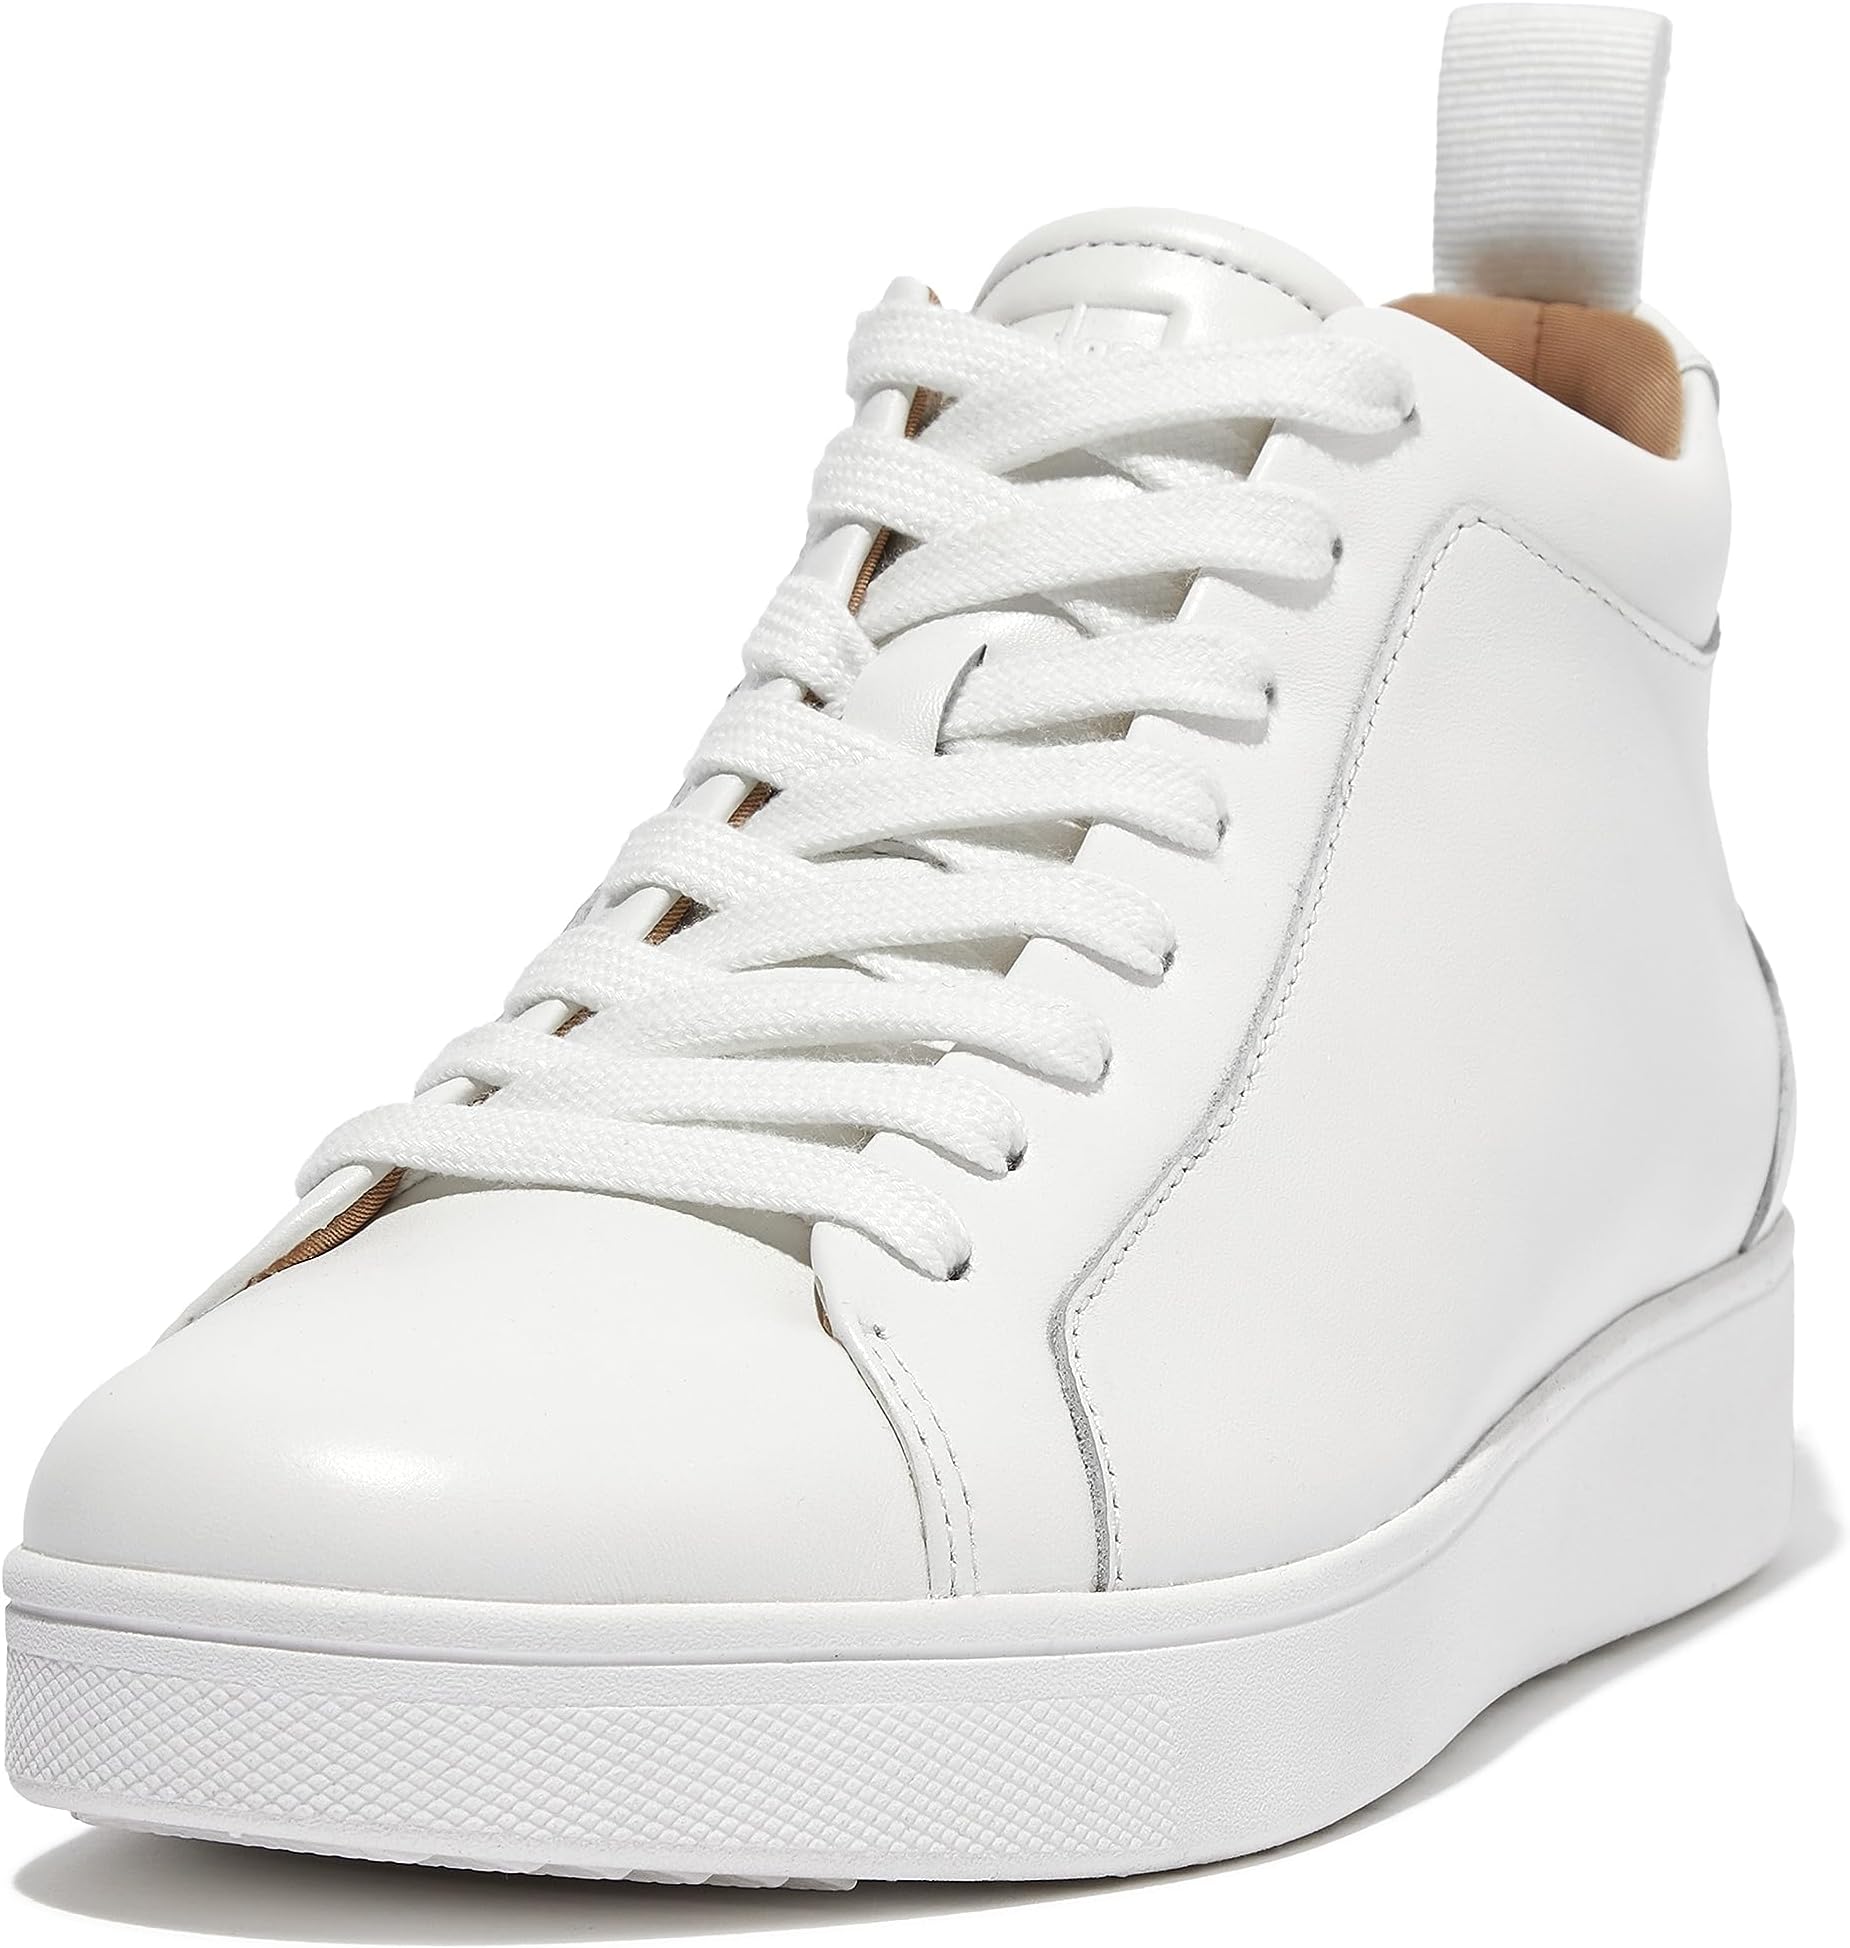 Кроссовки Rally Leather High-Top Sneakers FitFlop, цвет Urban White кроссовки fitflop rally leather high top sneakers